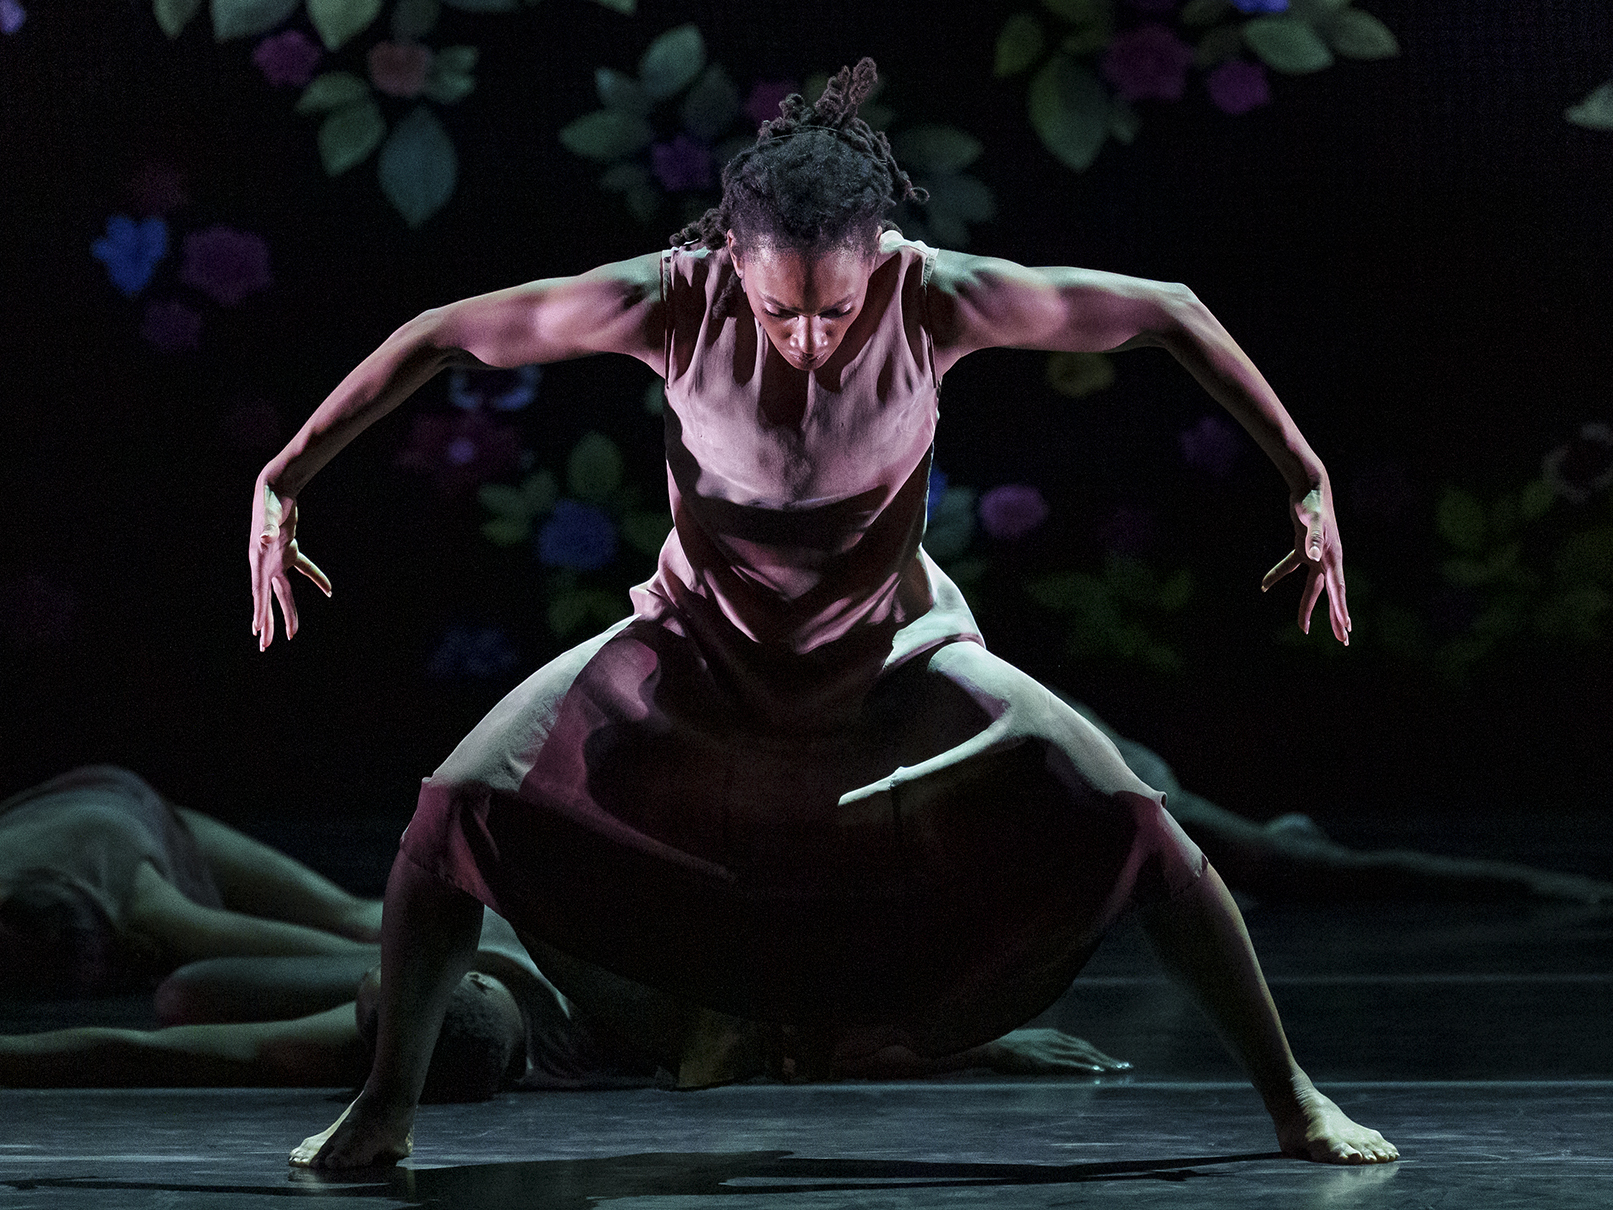 A dance about gun violence is touring nationally with Alvin Ailey’s company